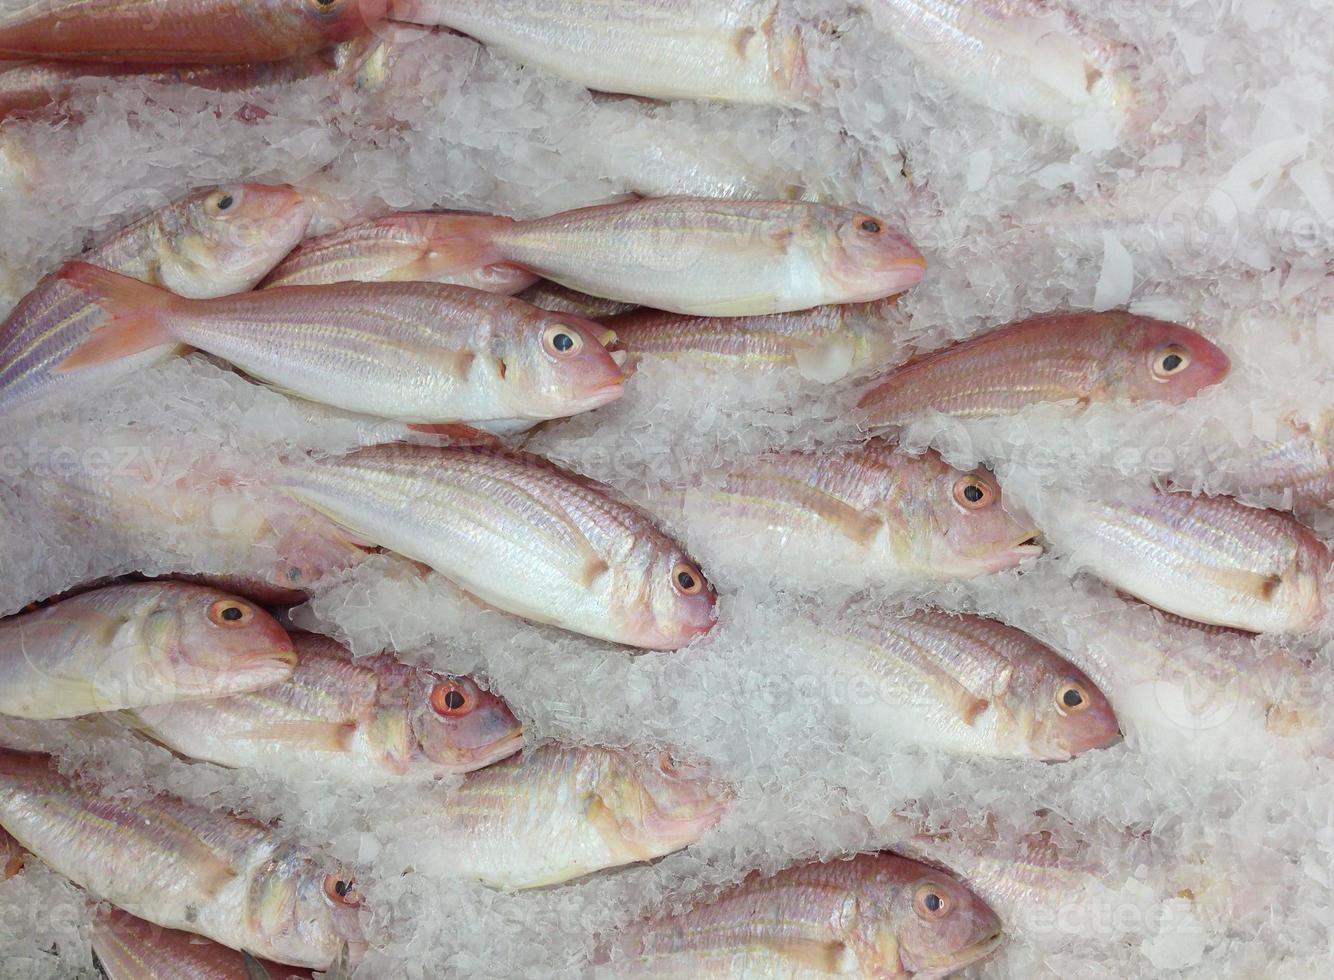 Frozen fish in the market photo